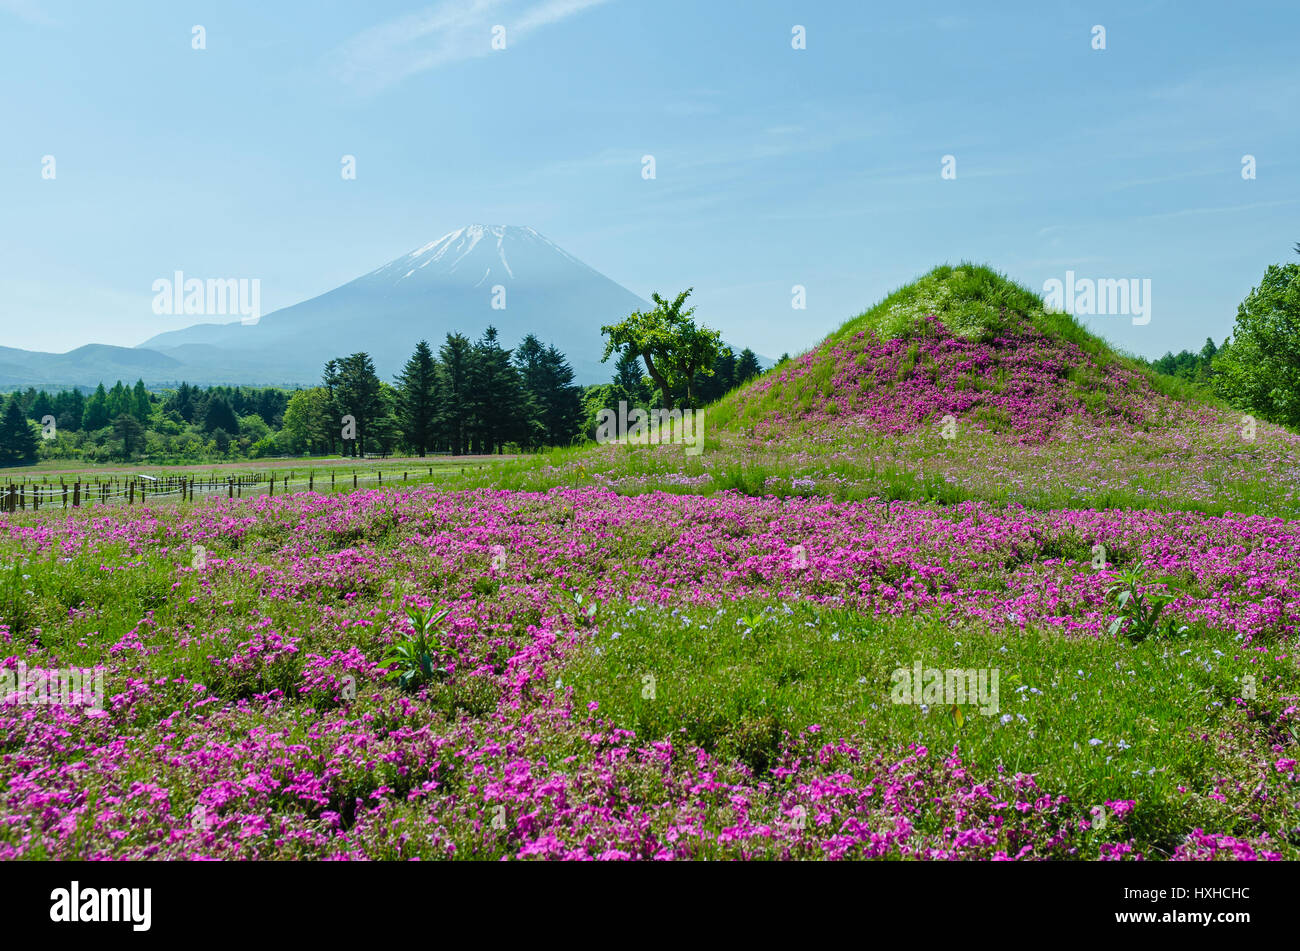 Mount fuji and pink moss in may at japan ,selective focus blur foreground Stock Photo